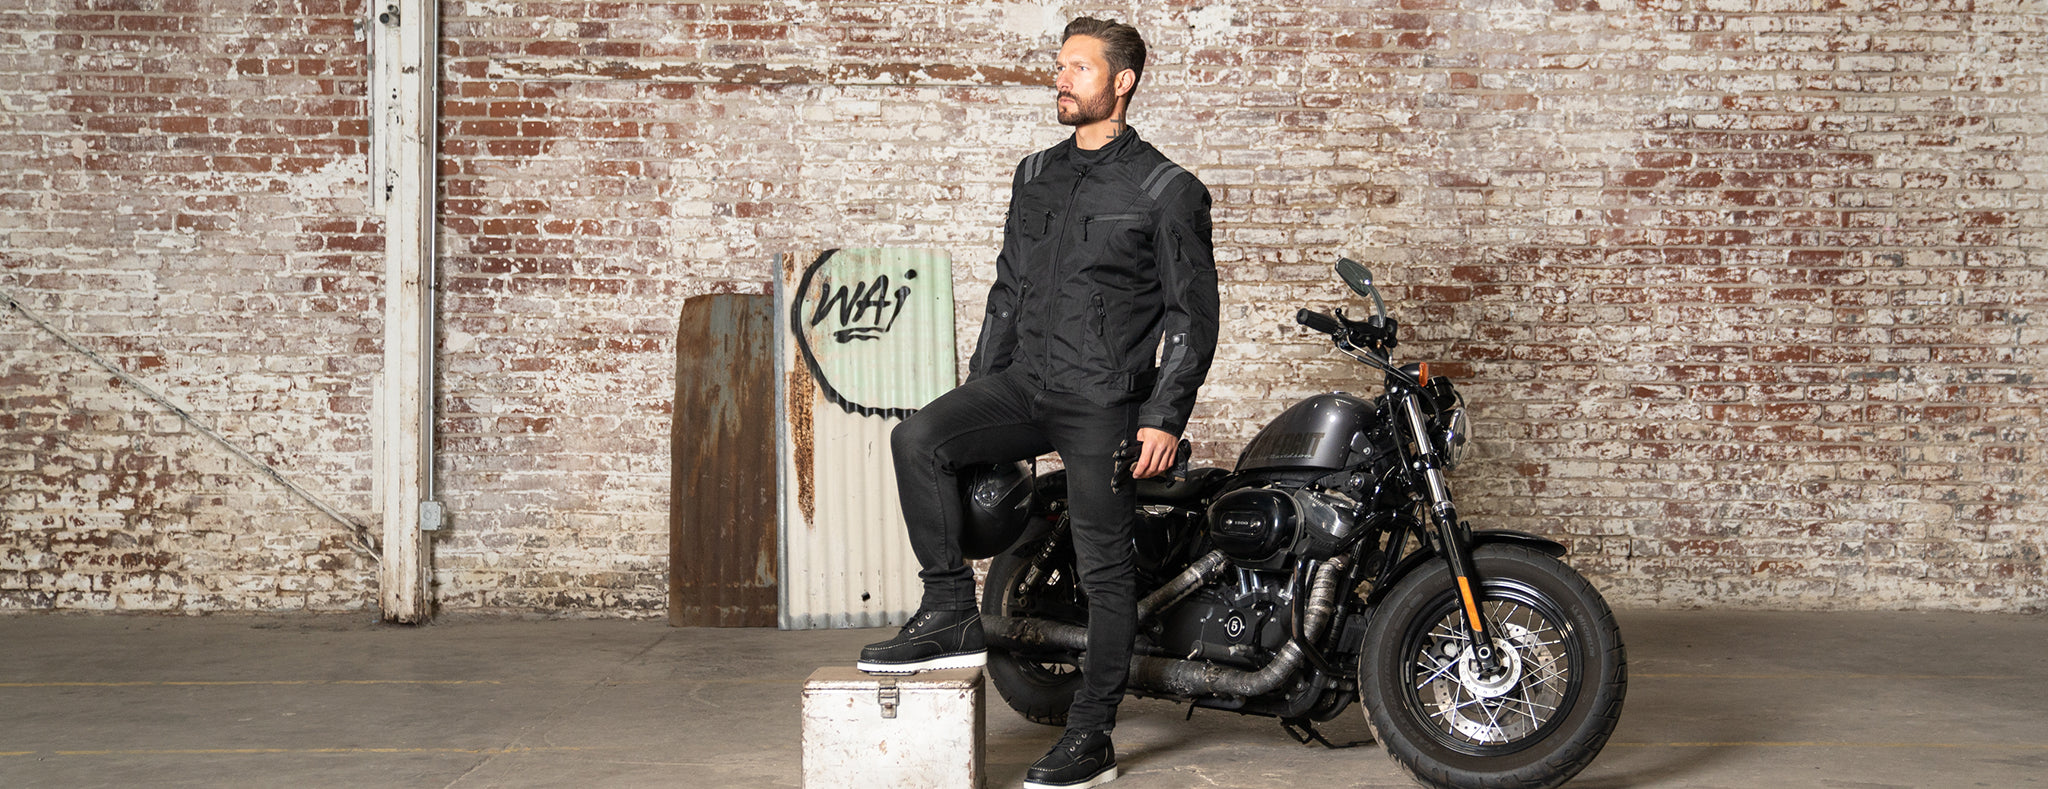 Choose Motorcycle Jacket According to Riding Style